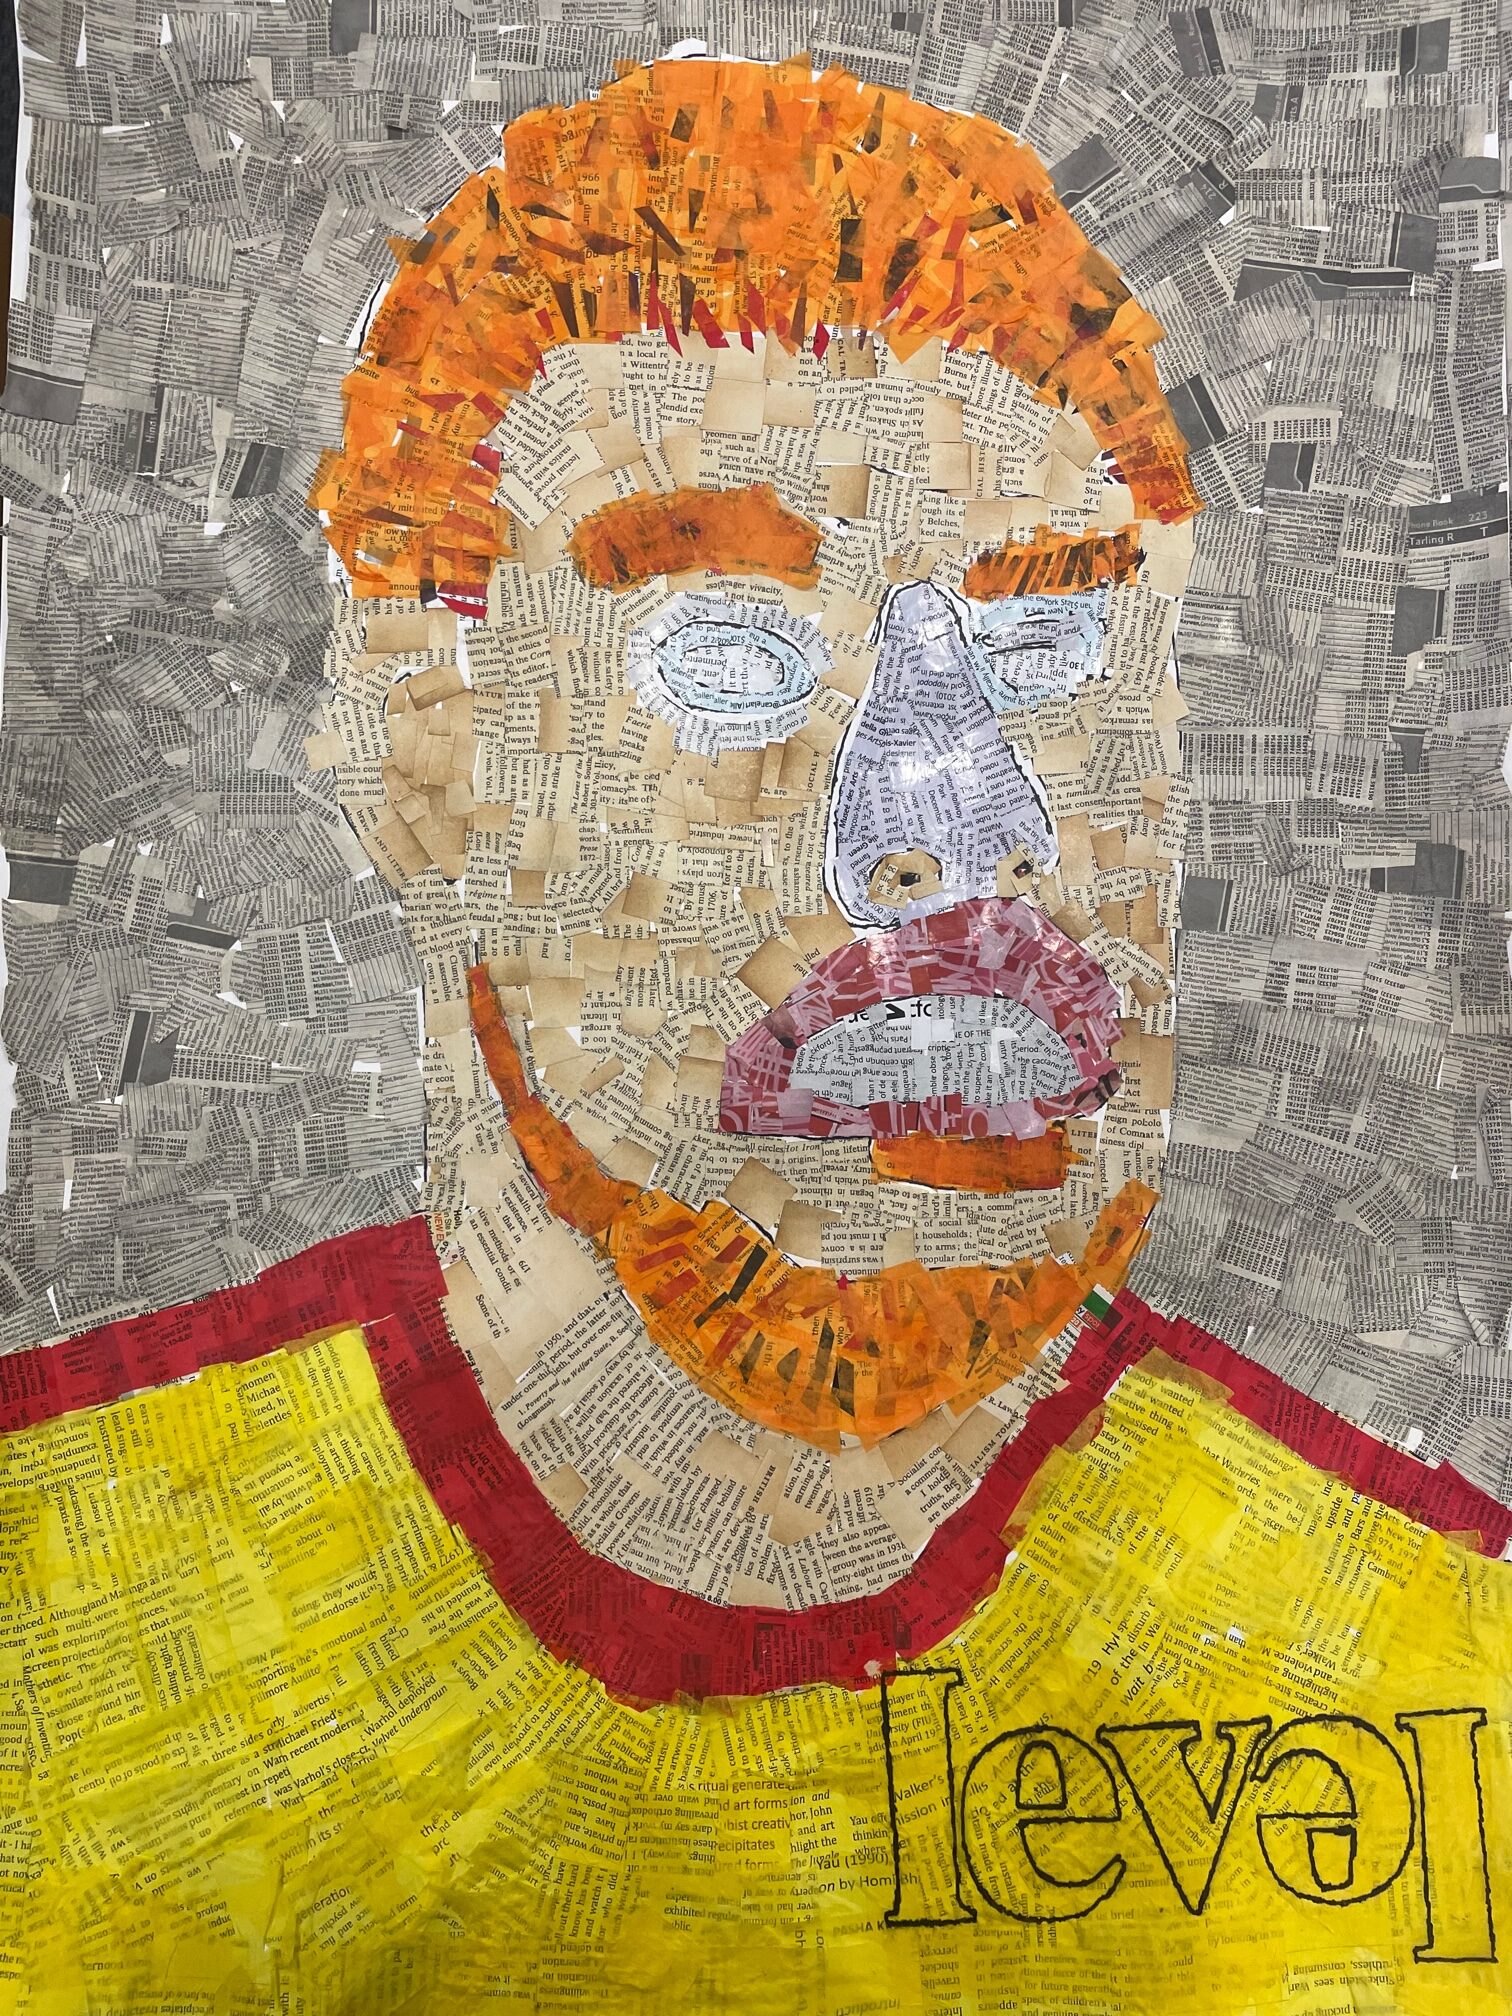 Collage self portrait using newsprint and tissue paper